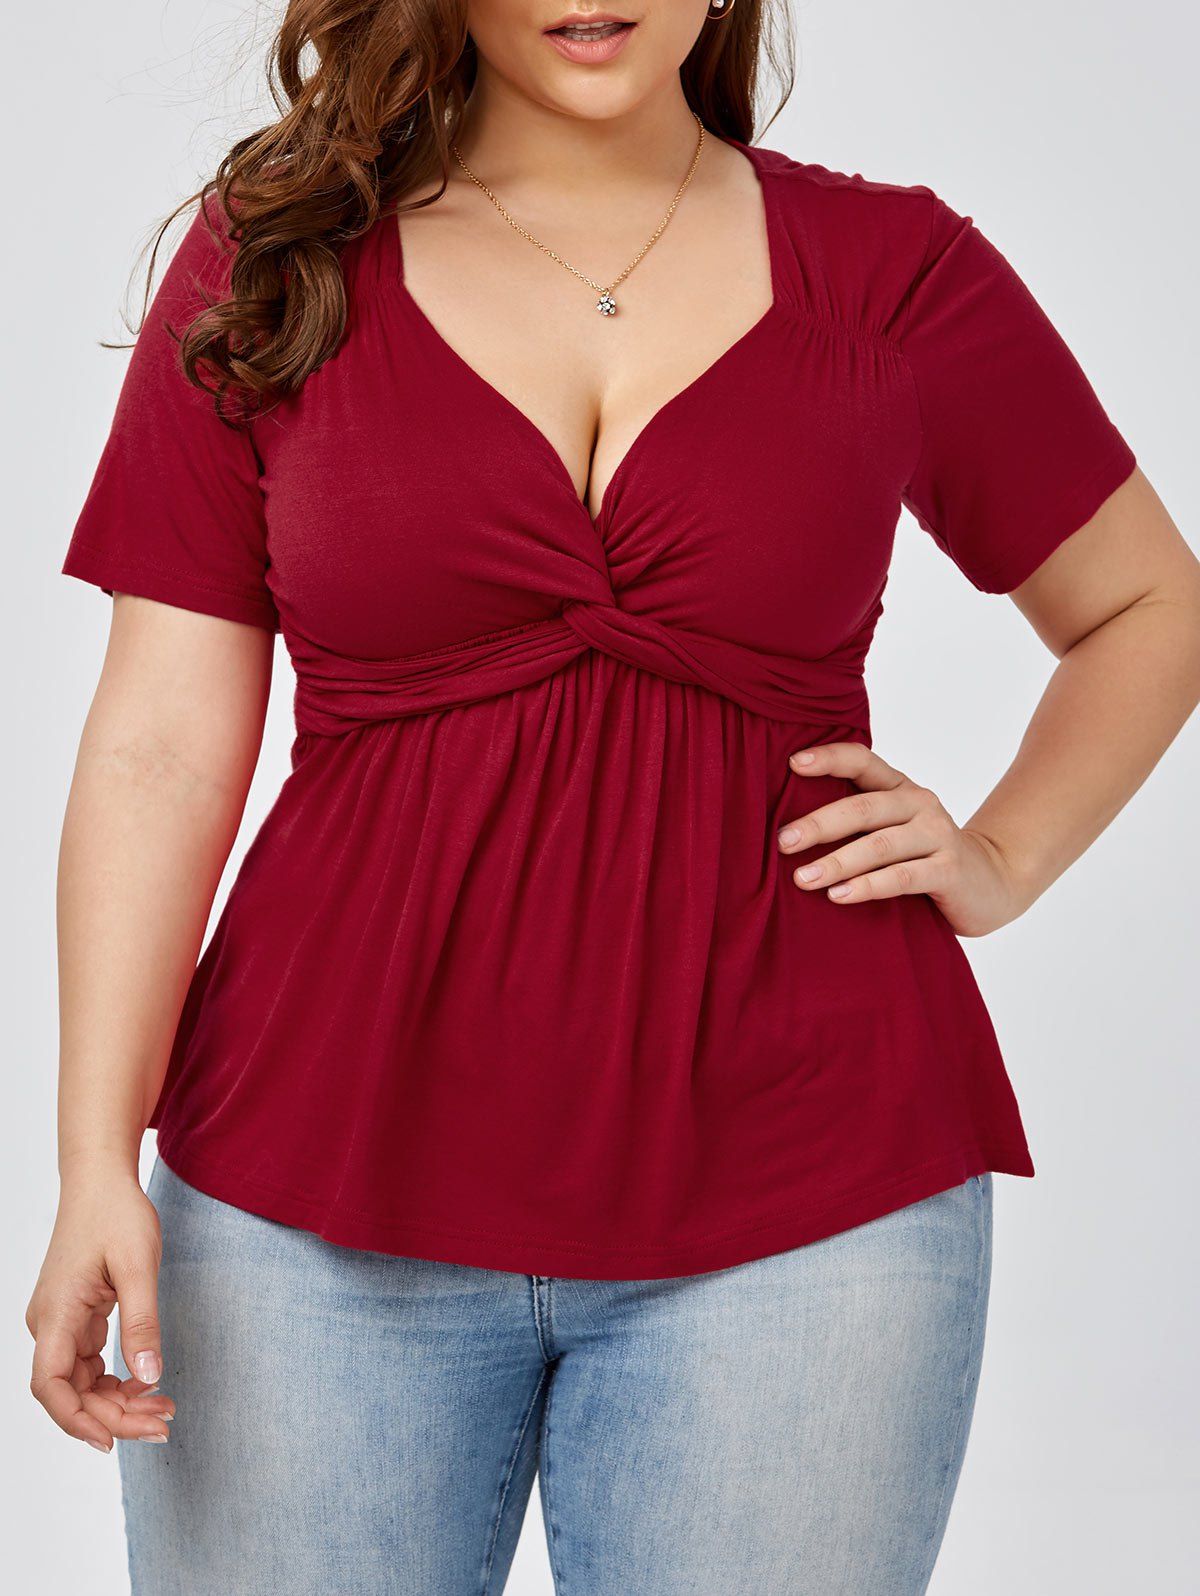 [41% OFF] 2021 Plus Size Knot Front Top In WINE RED | DressLily